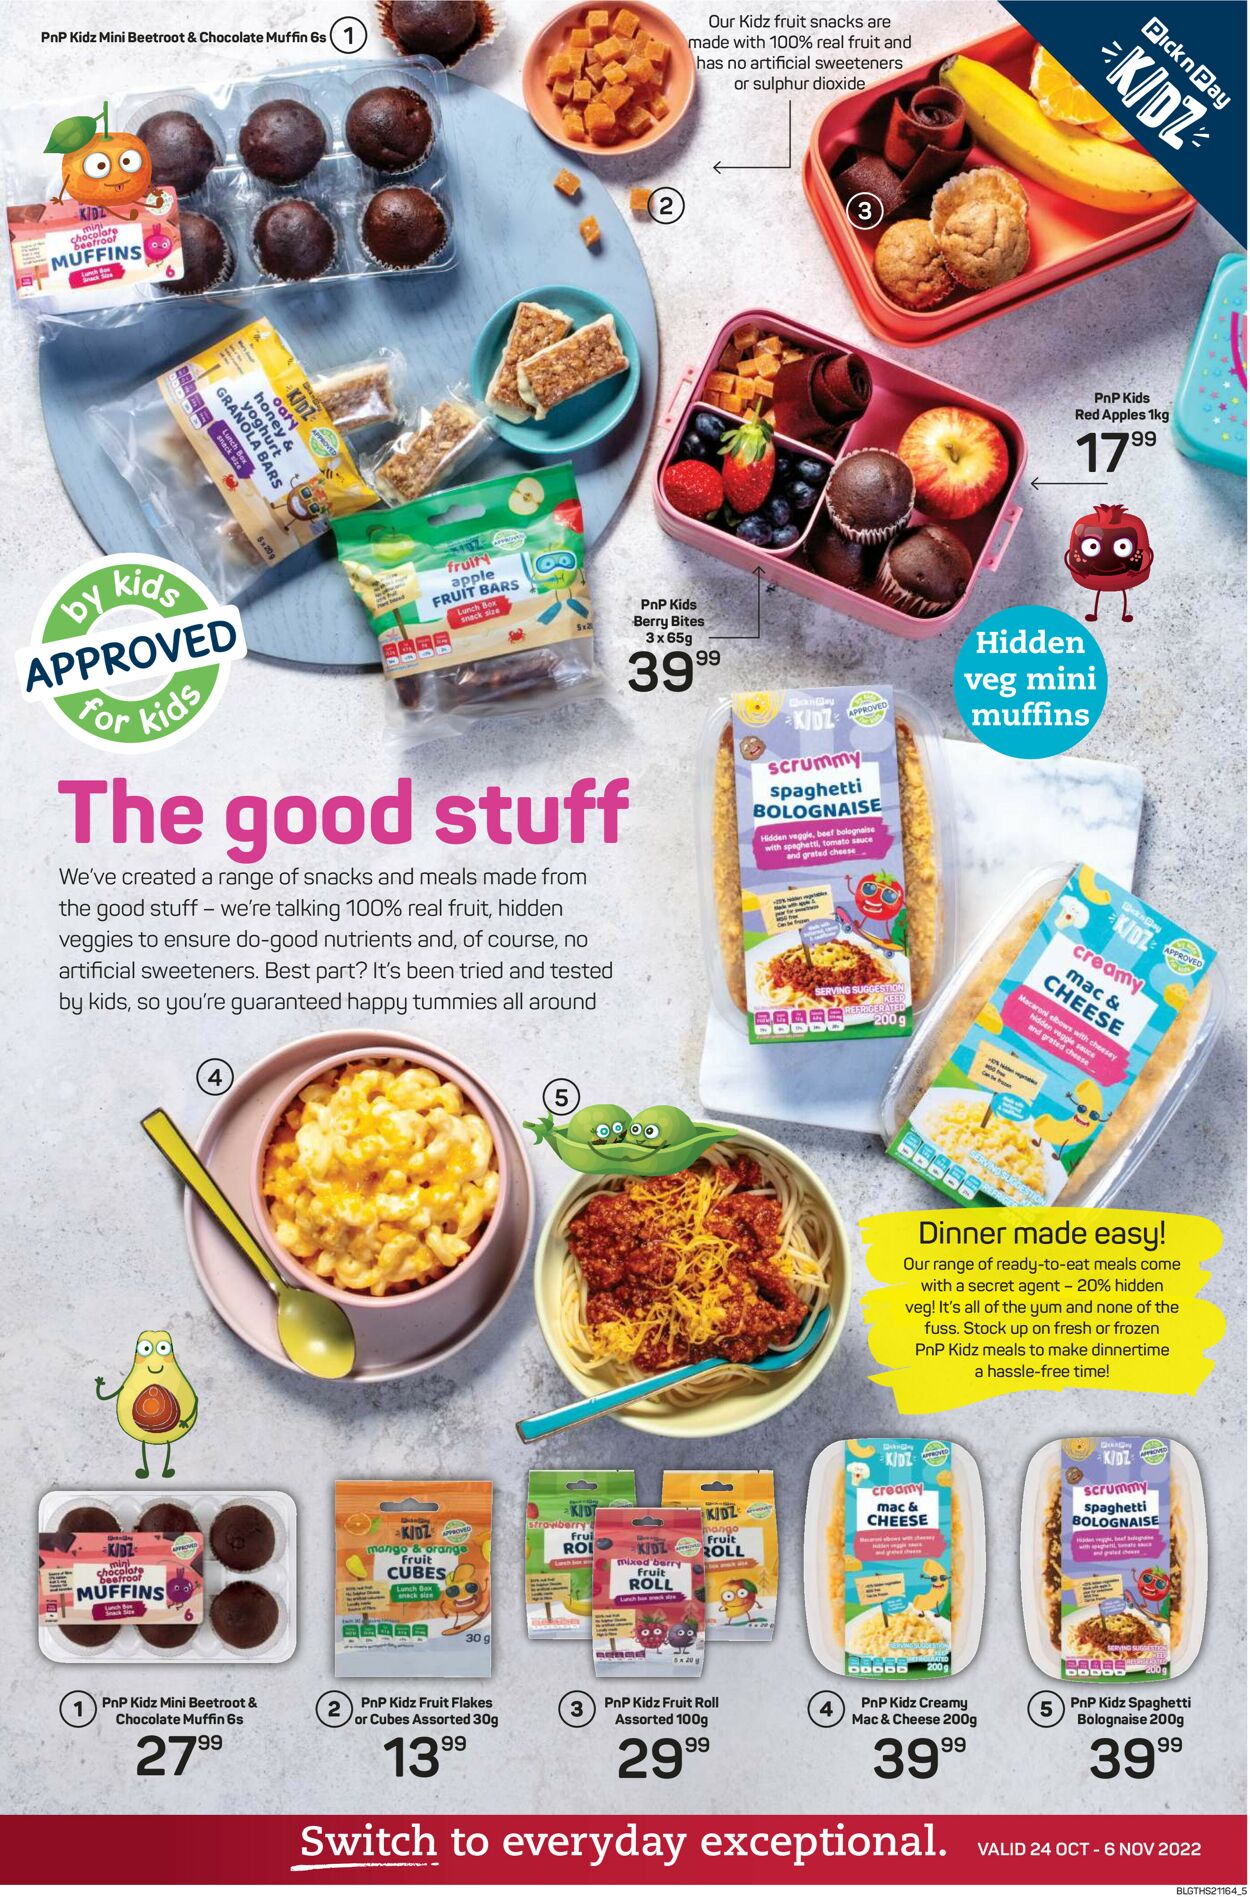 Pick n Pay Catalogue - 2022/10/24-2022/11/06 (Page 5)